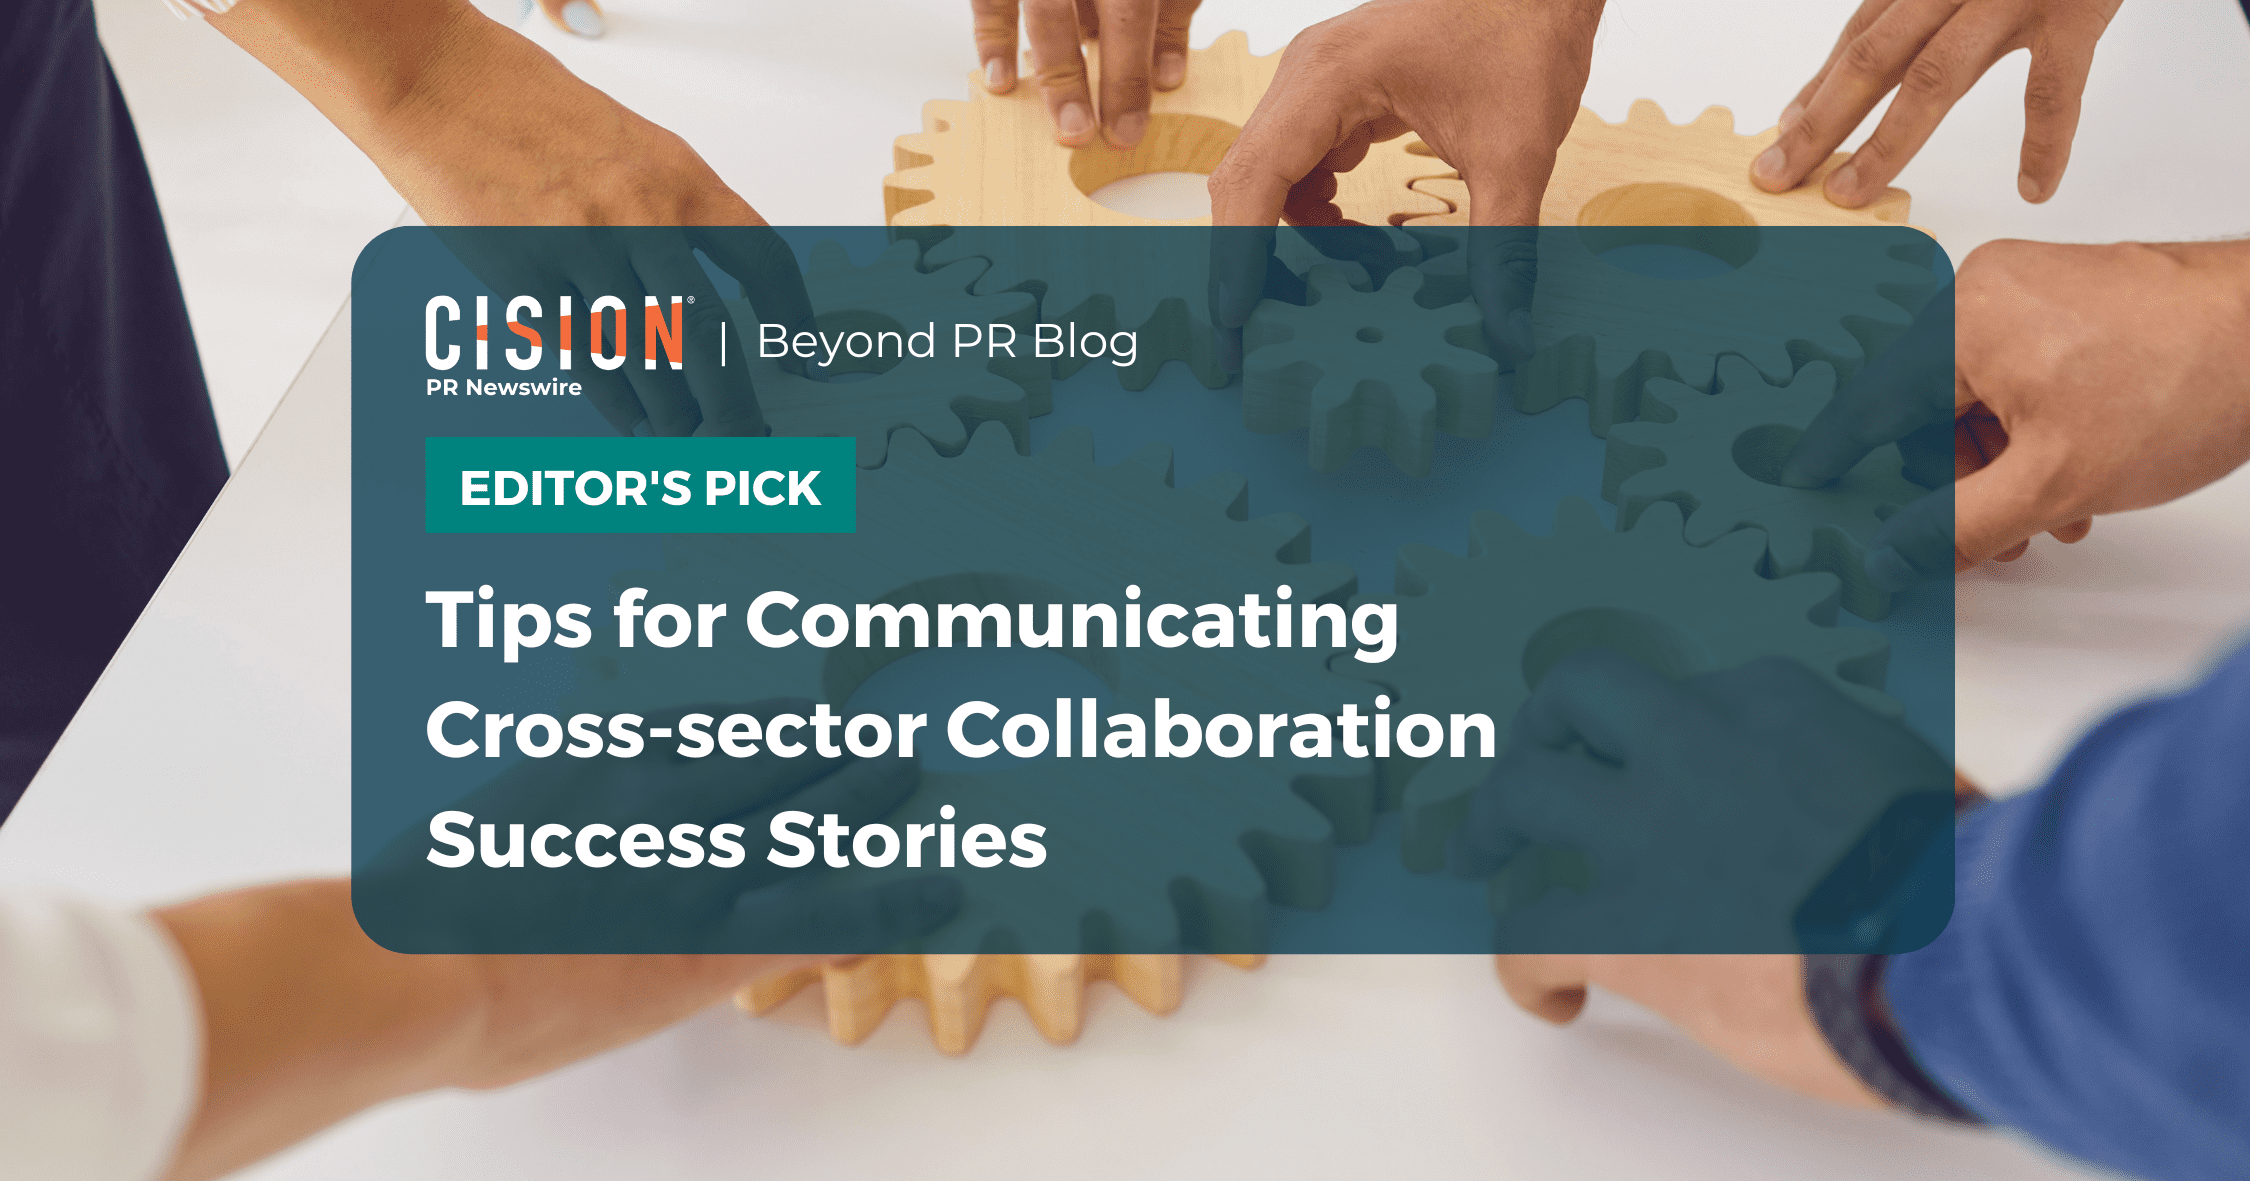 Editor’s Pick: Tips for Communicating Cross-sector Collaboration Success Stories